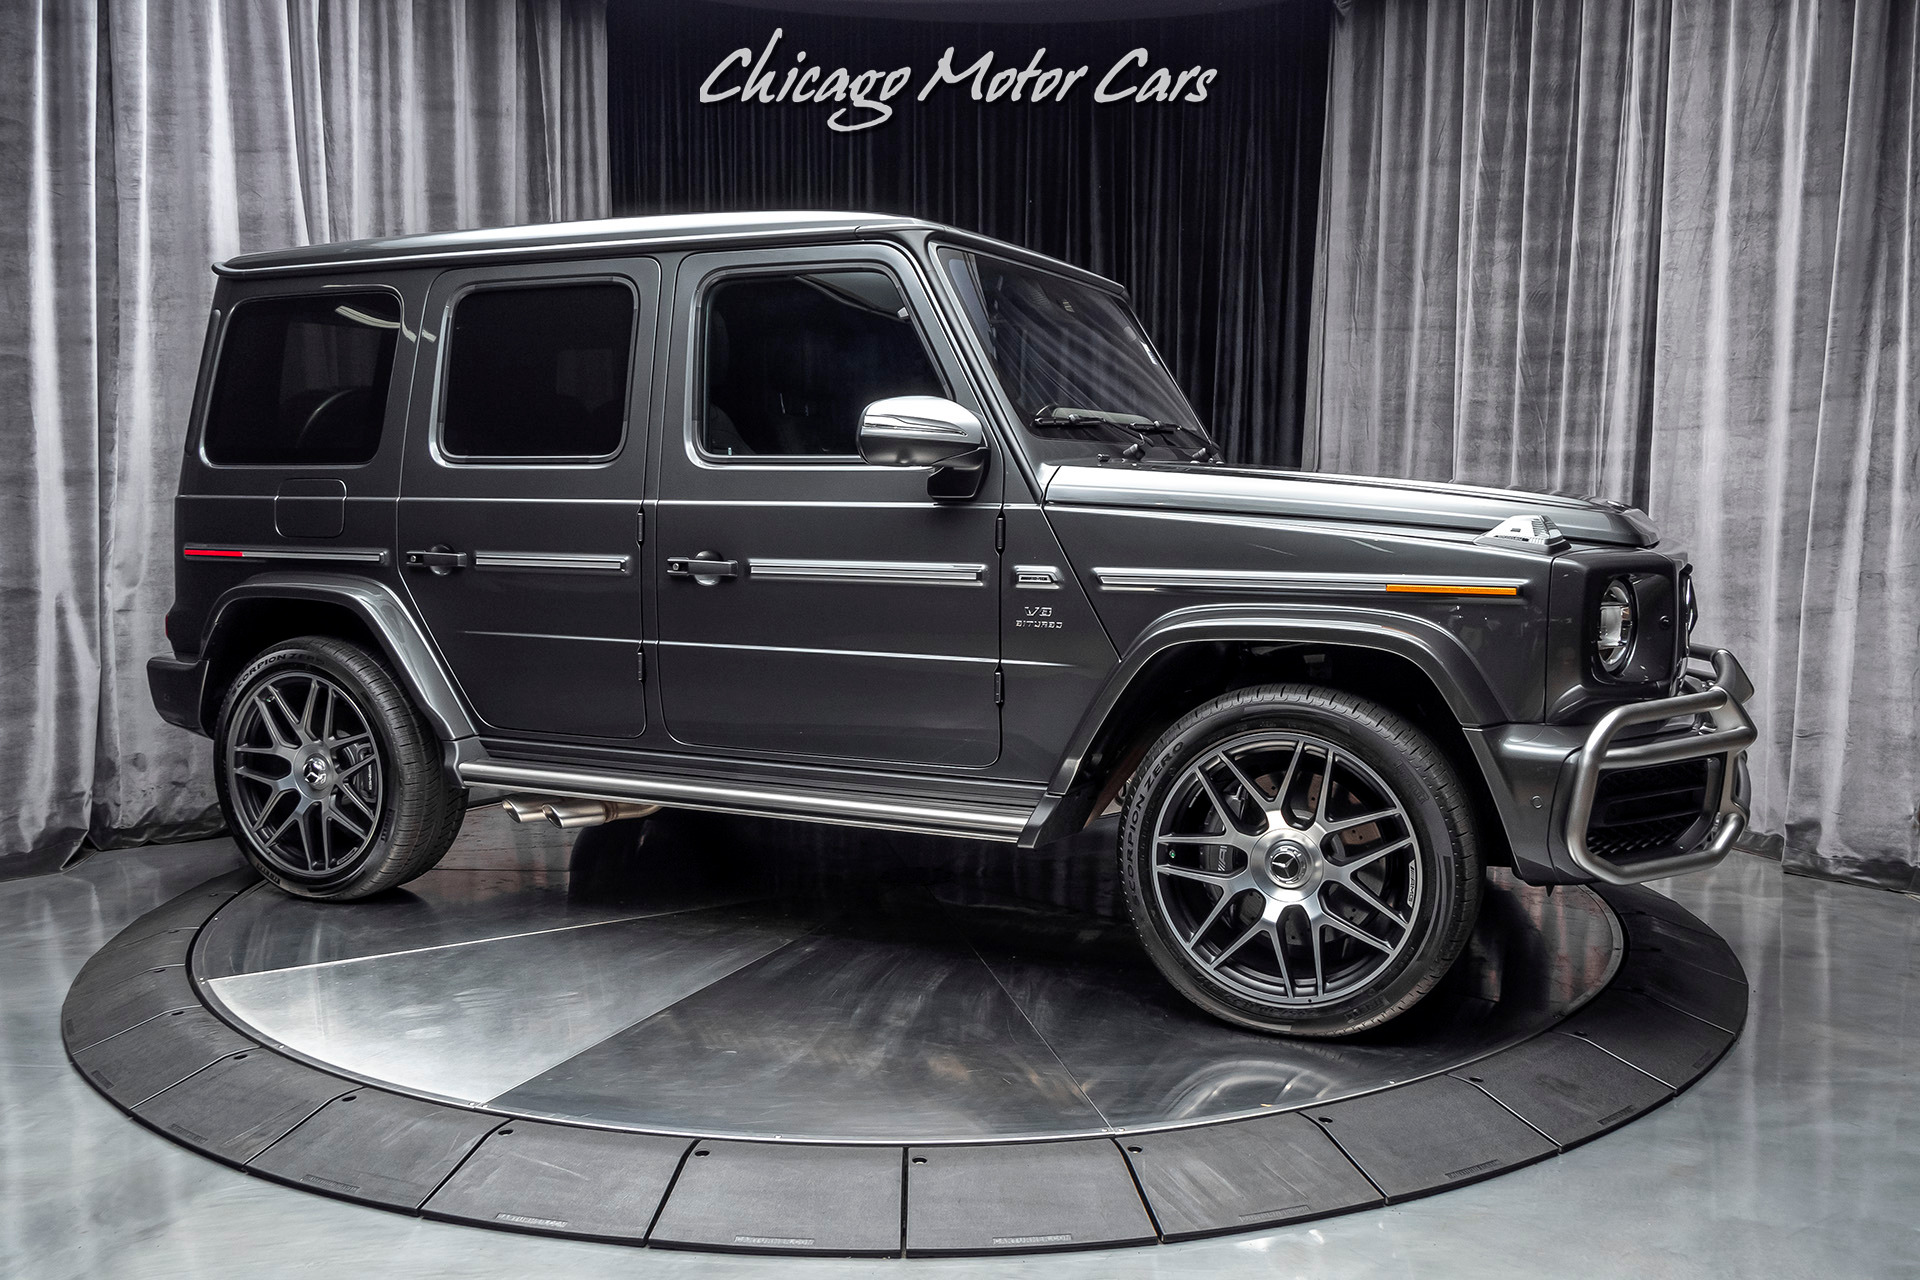 Used-2020-Mercedes-Benz-G63-AMG-SUV-Stronger-Than-Time-Edition-Only-30-Miles-BRAND-NEW